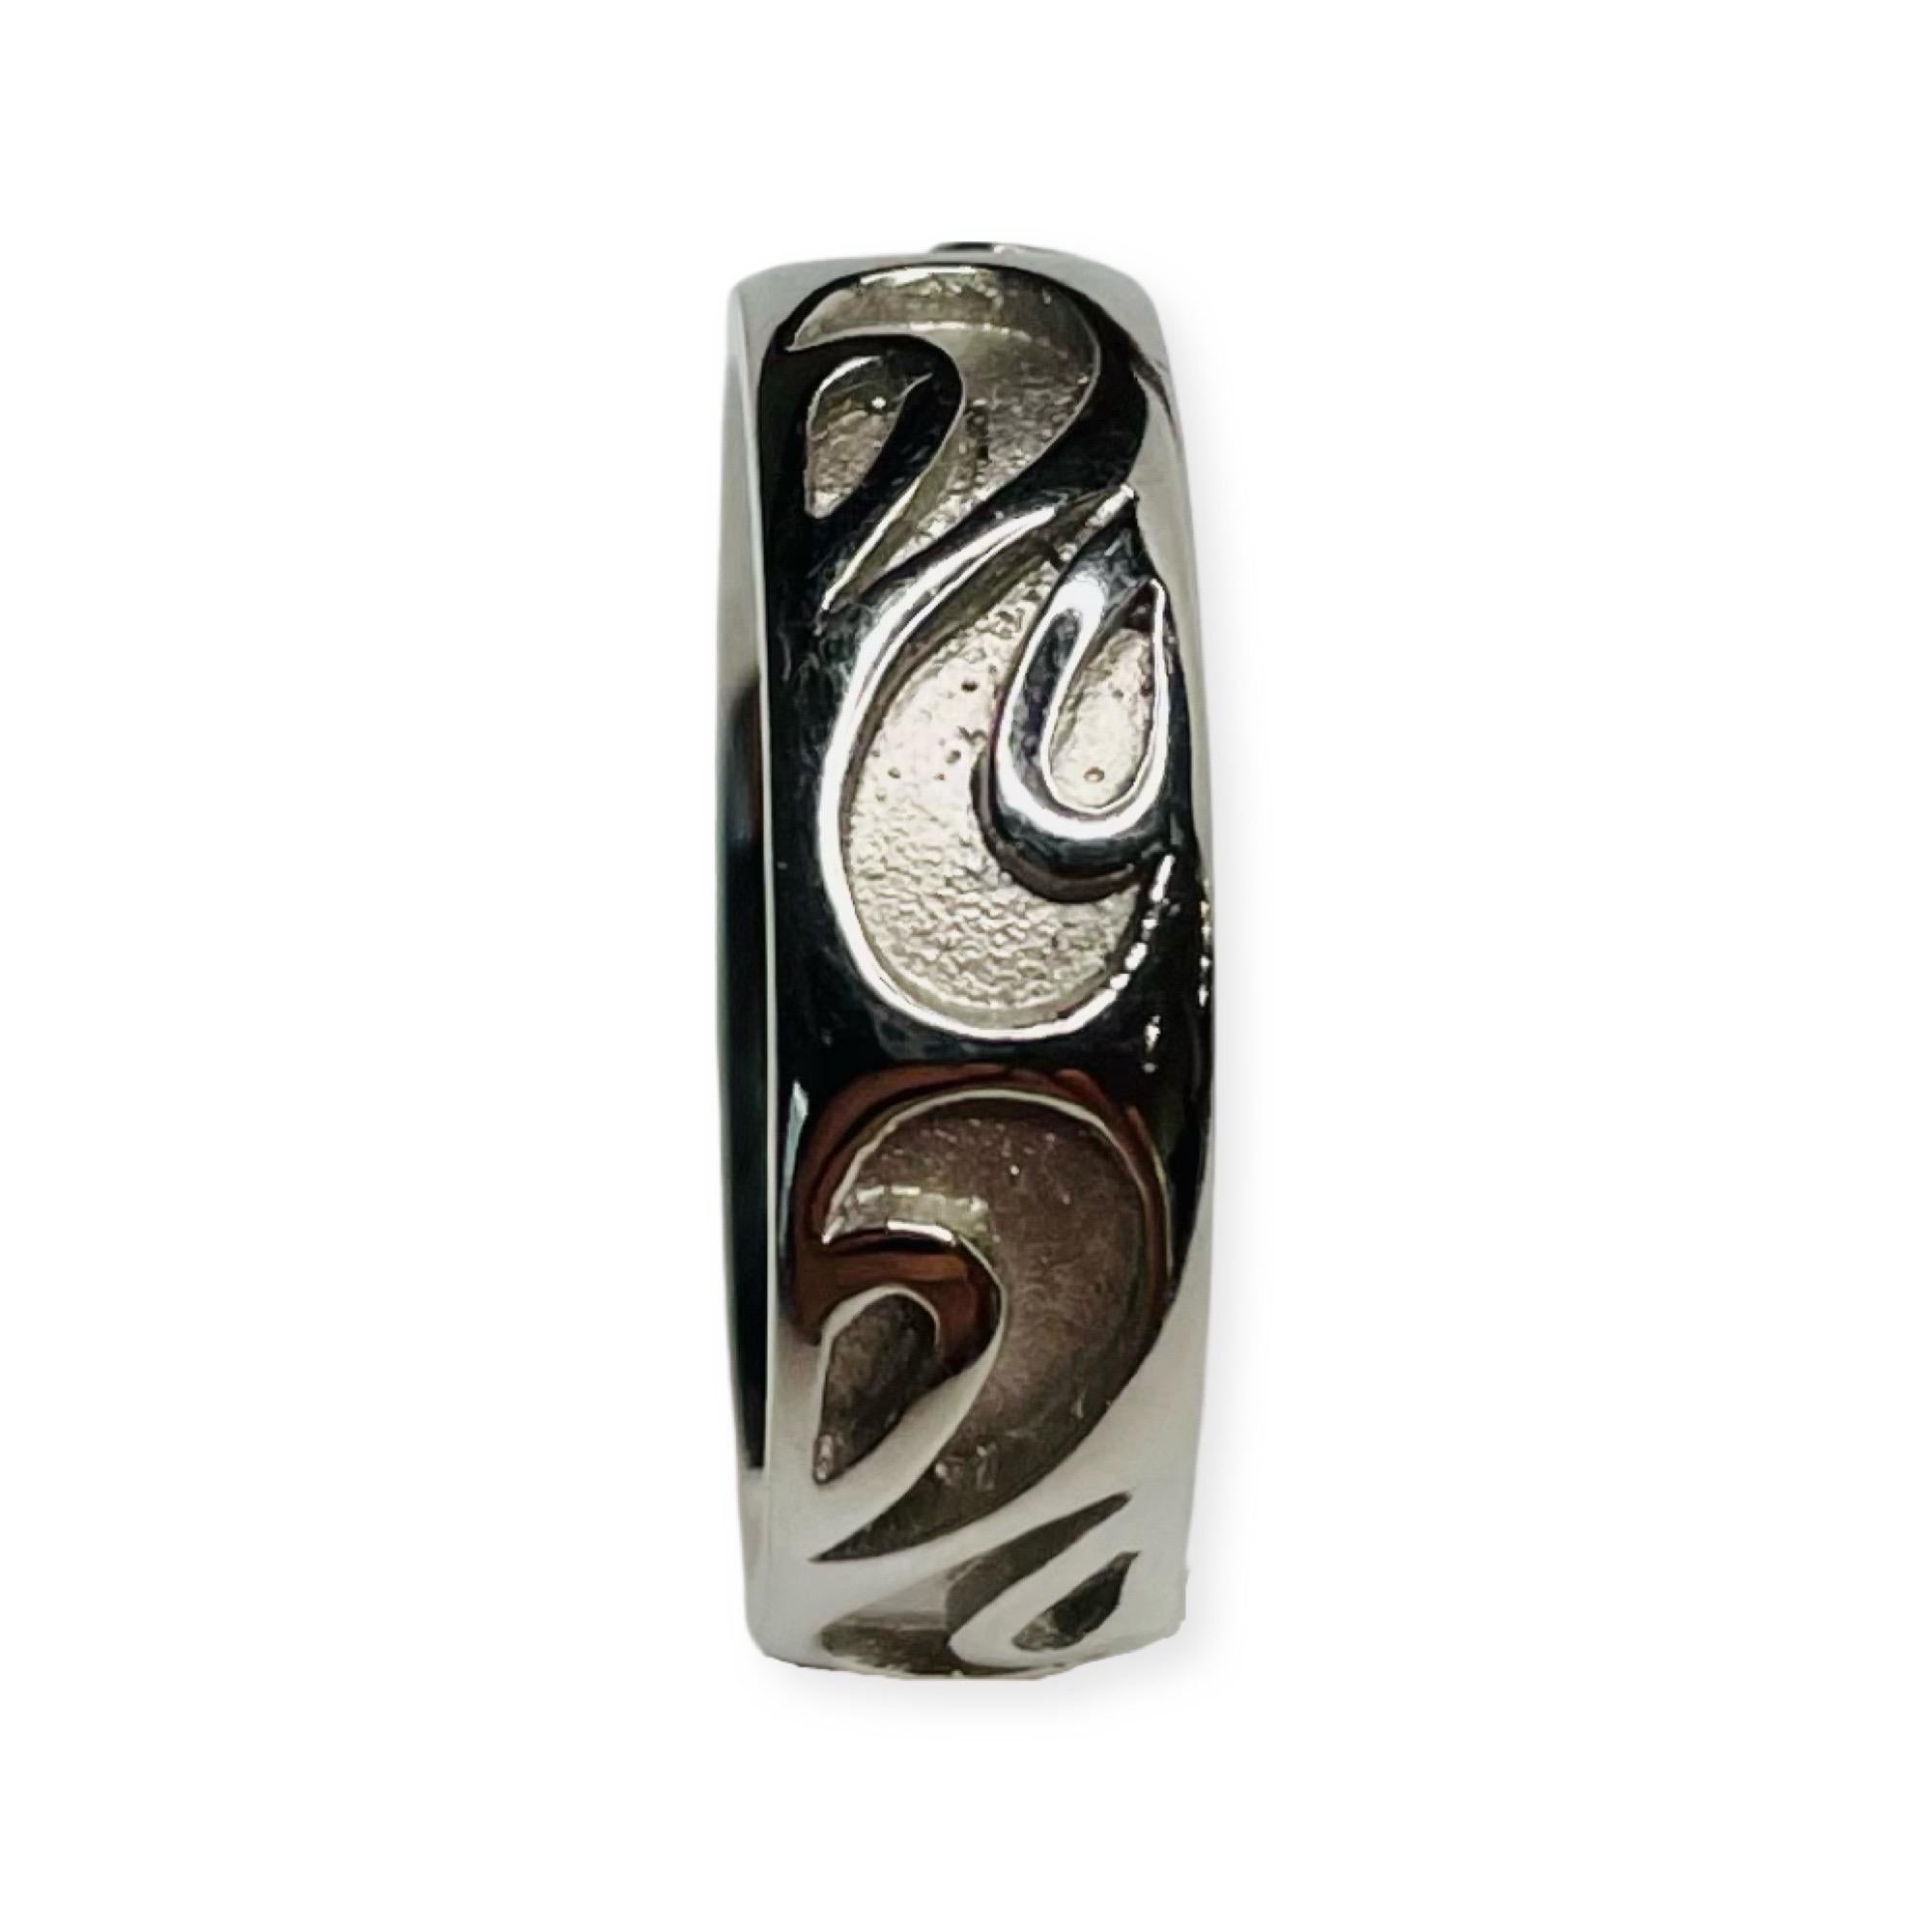 Rudolf Erdel Platinum Wedding Band. It is finger size 7.25 and can be sized for an additional charge. It is 6.0 mm wide. It has a swirl pattern and is matte finish and high polish.
100-100-210 